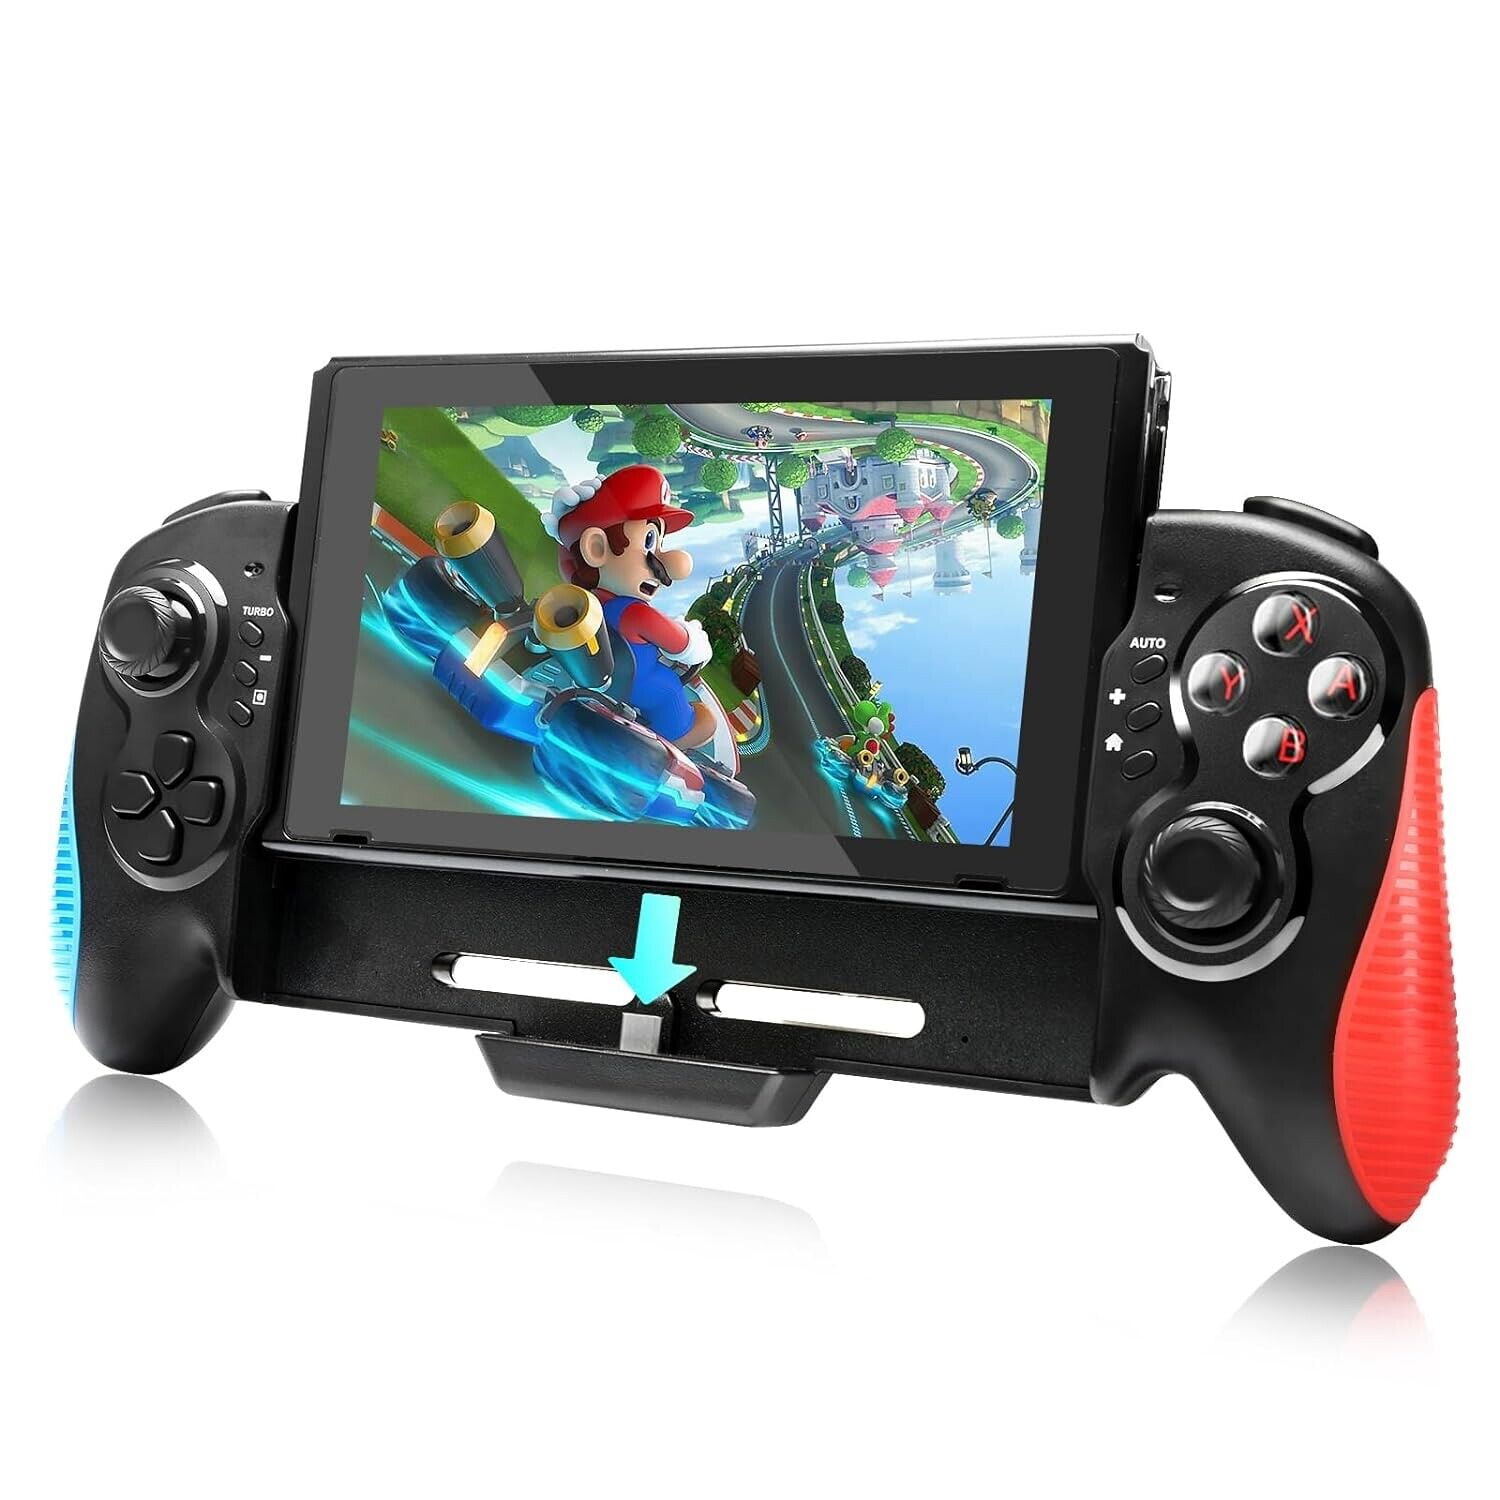 GAMINJA NS009 Bluetooth Game Controller Wireless Gamepad For Nintendo Switch  Console PS3 PC Windows 7 10 Dual Vibration Joystick